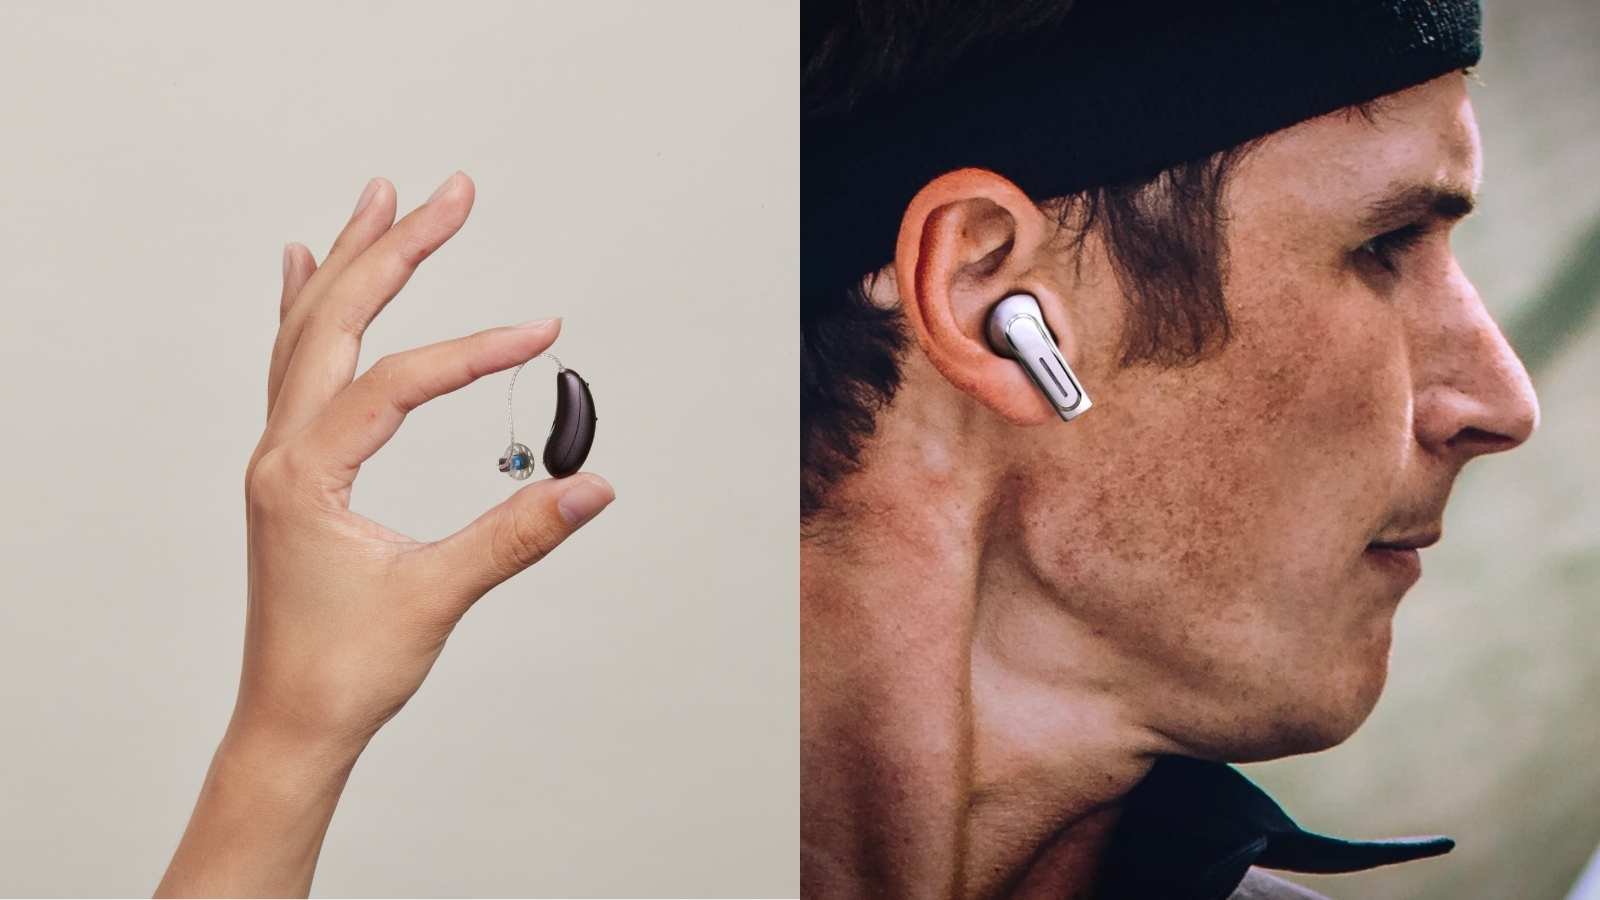 10 Best Bluetooth Hearing Aids In 2022 - Smallest and Smartest — Soundly